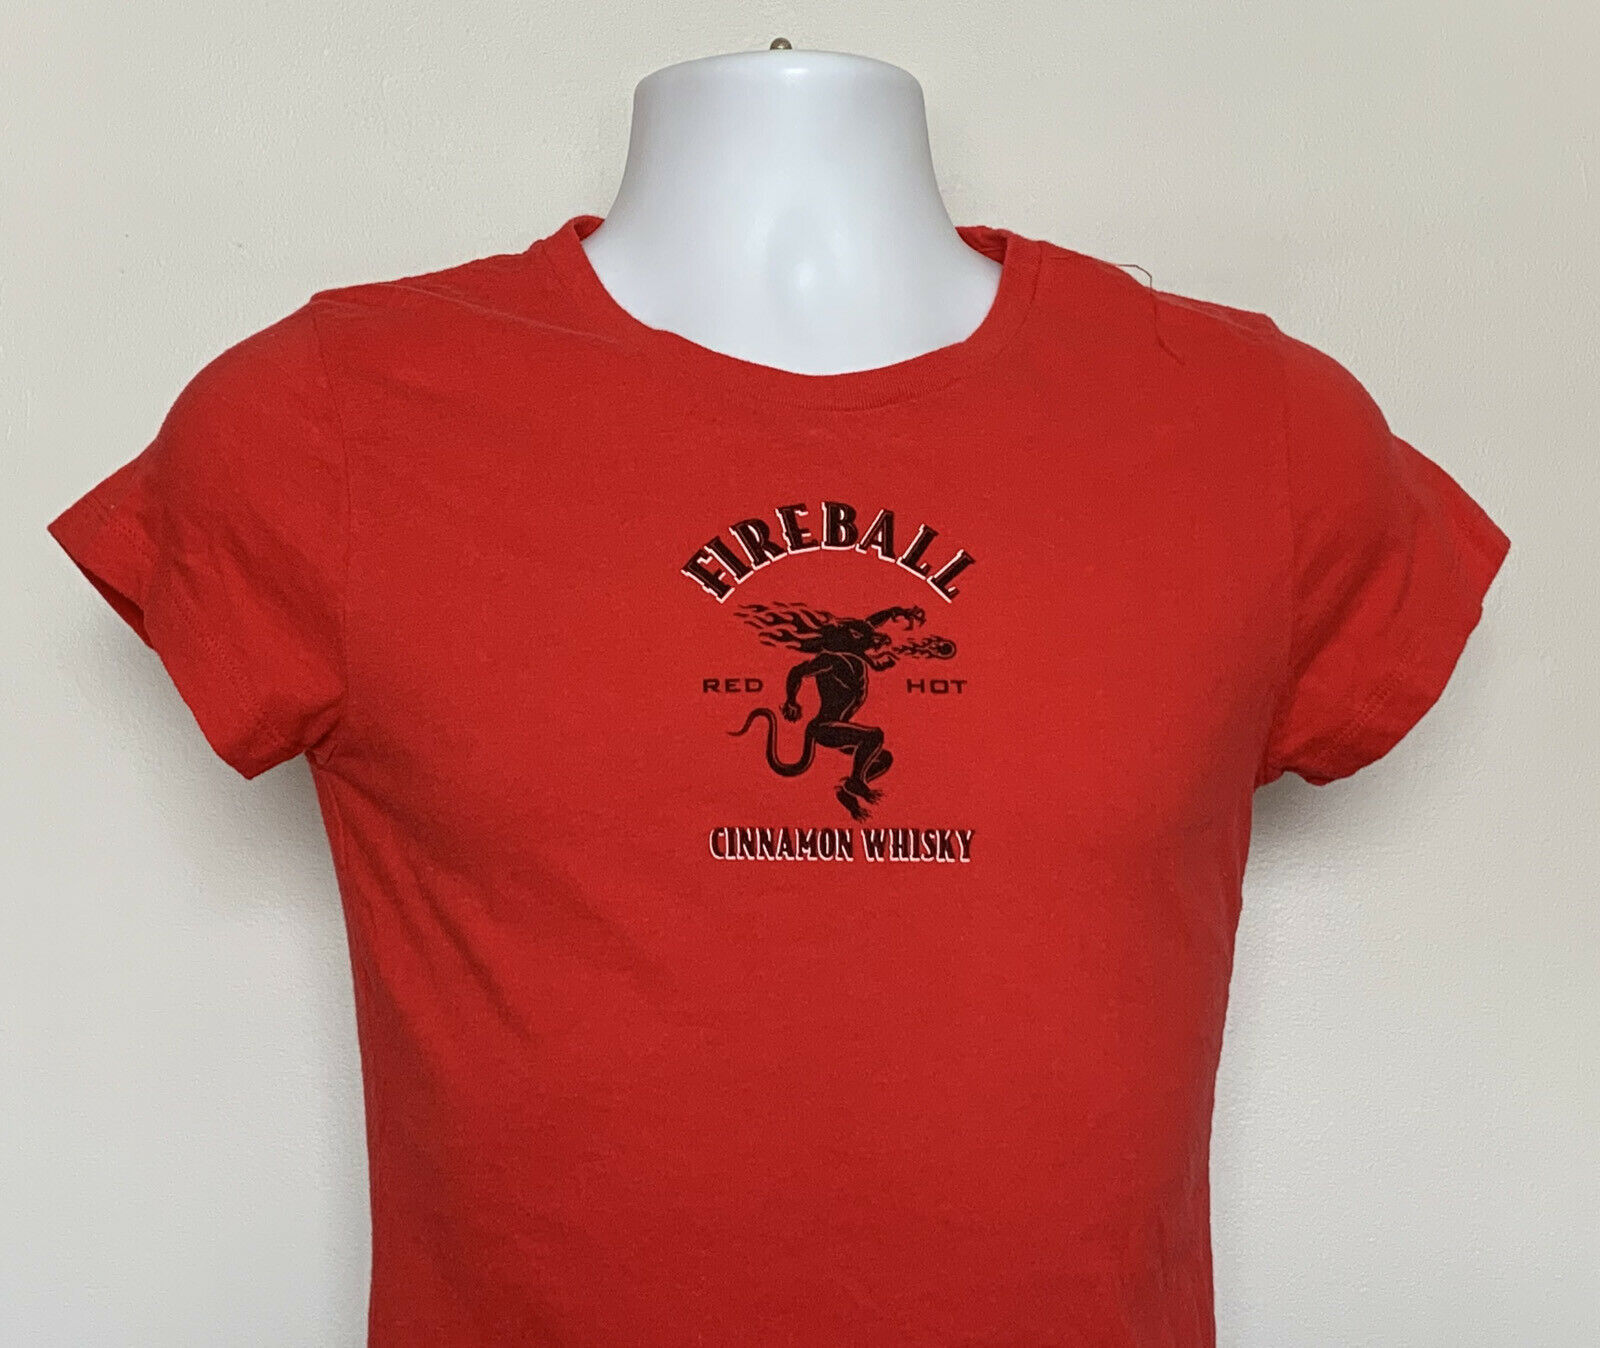 Primary image for Fireball Cinnamon Whisky T Shirt Womens Large Red Fire breathing Dragon Cotton